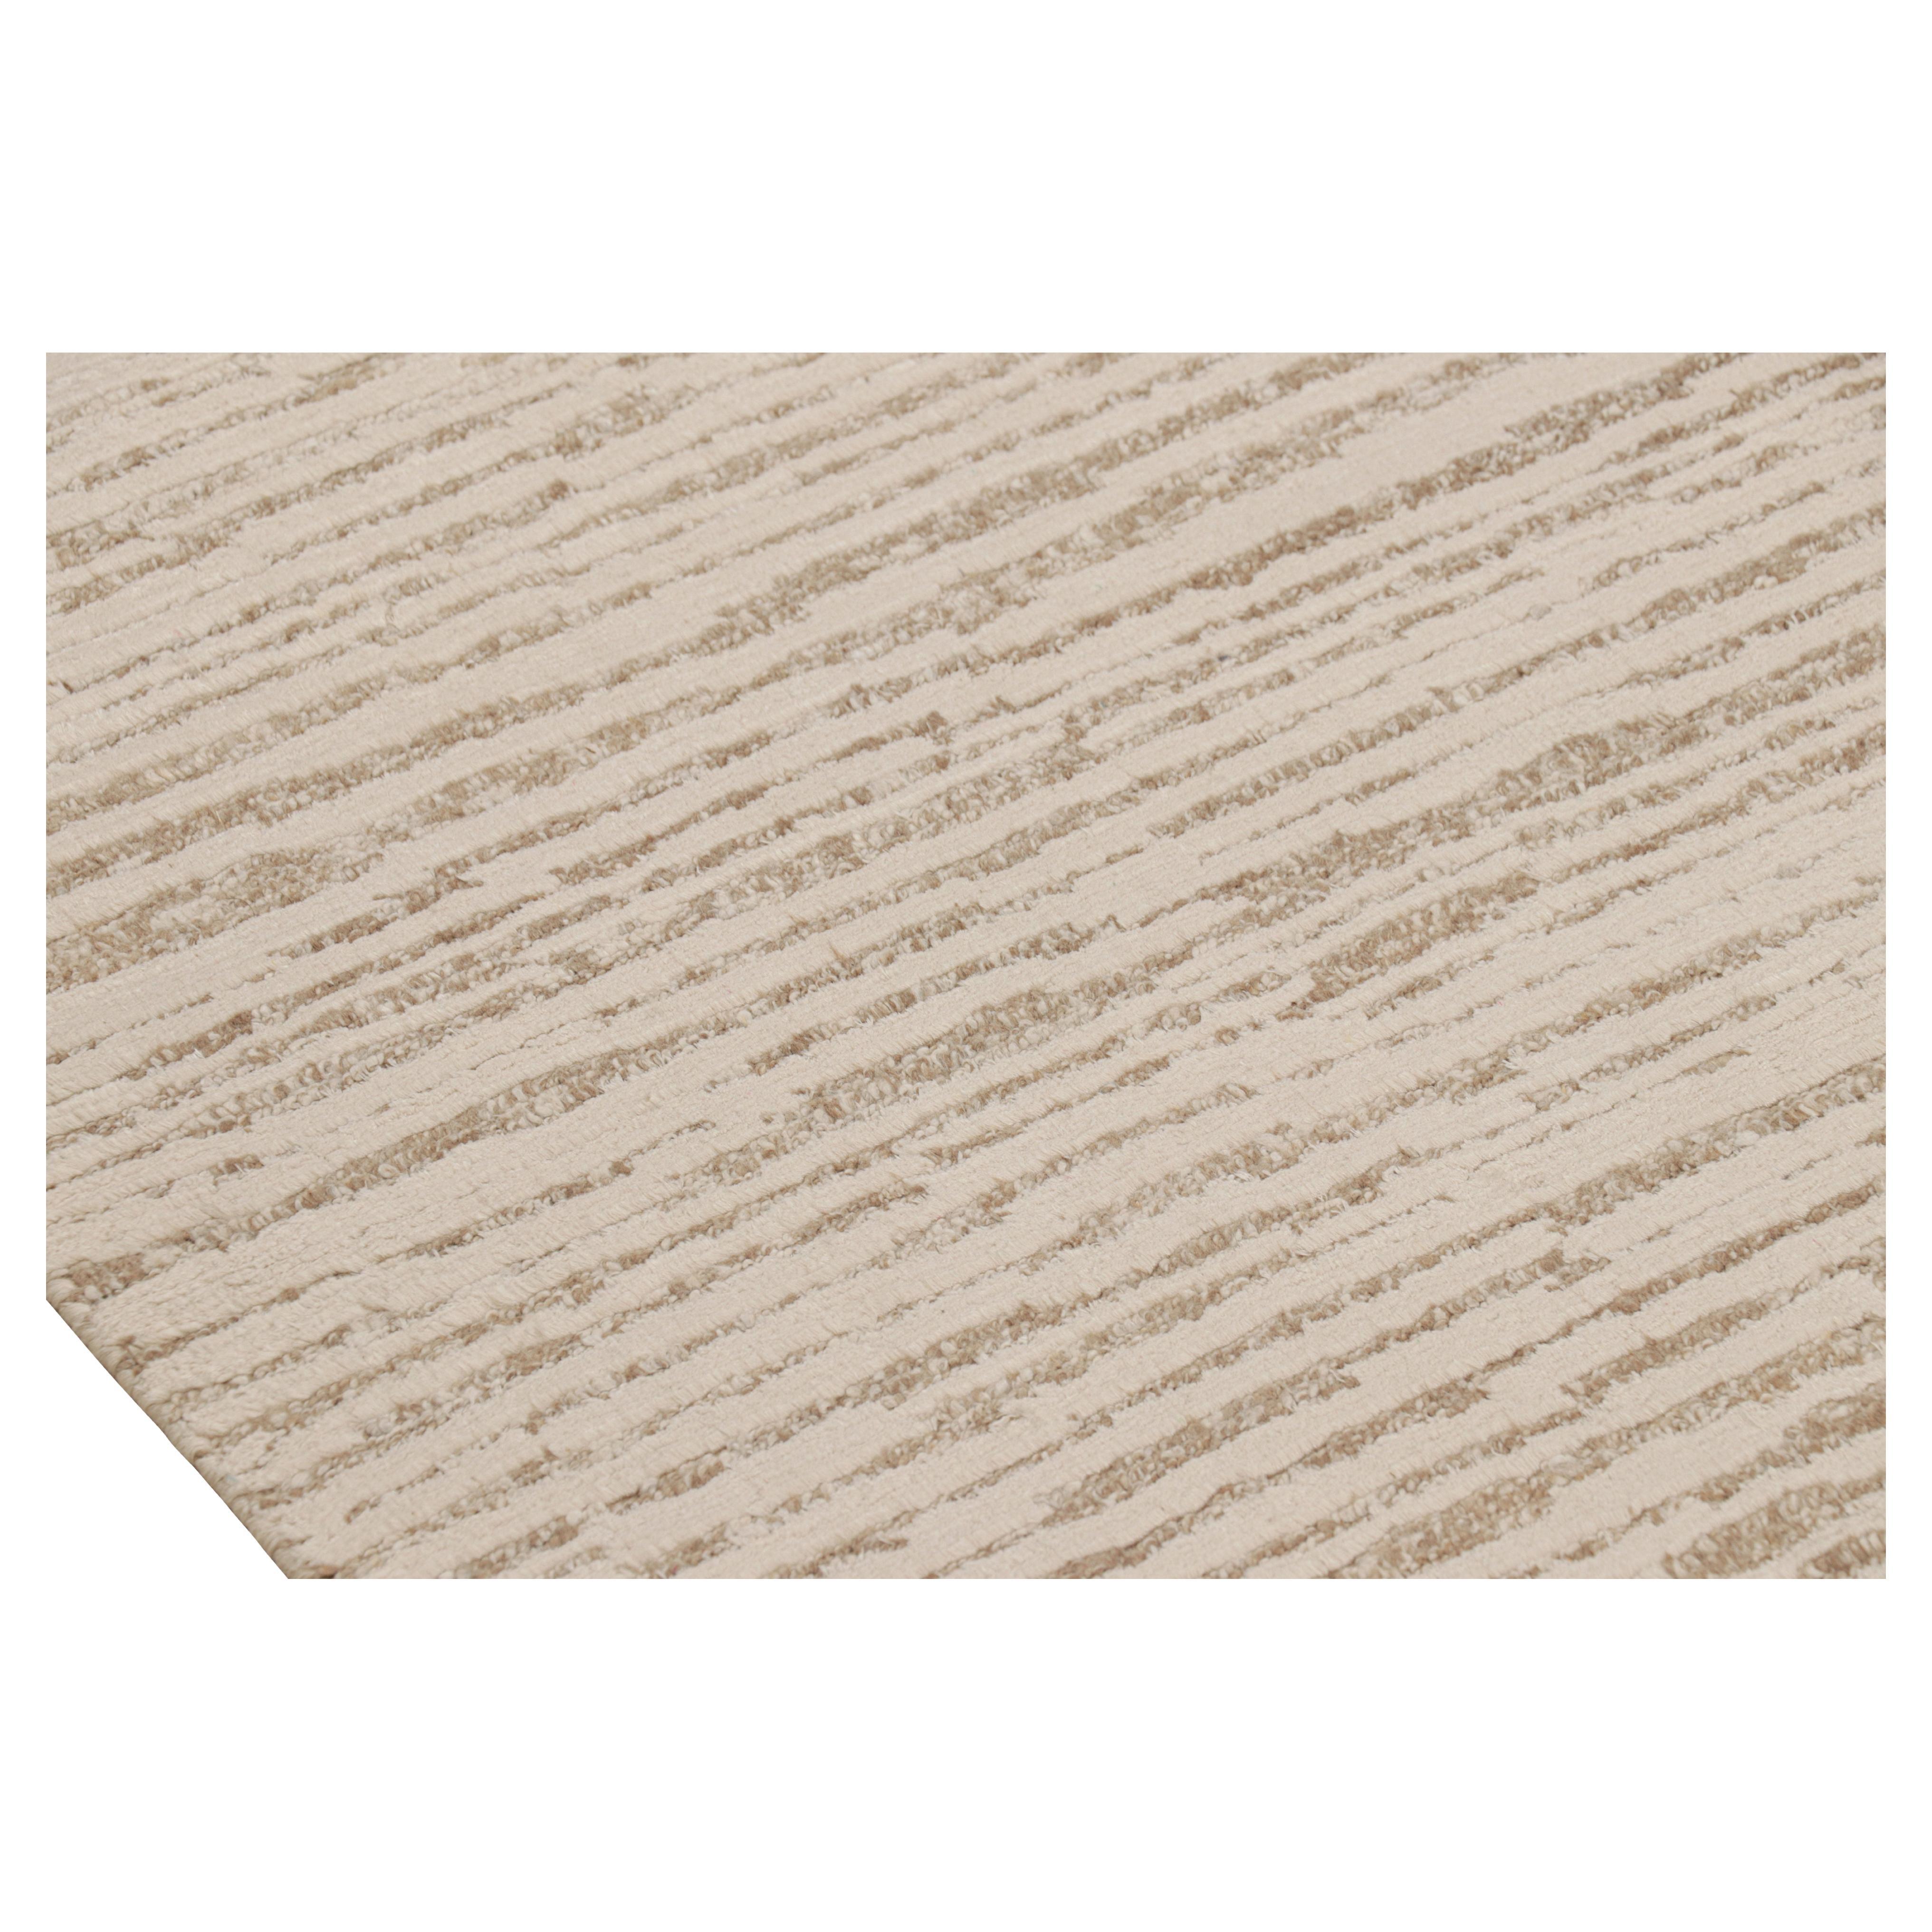 Rug & Kilim’s Contemporary Textural Rug with Beige and Cream White Tones For Sale